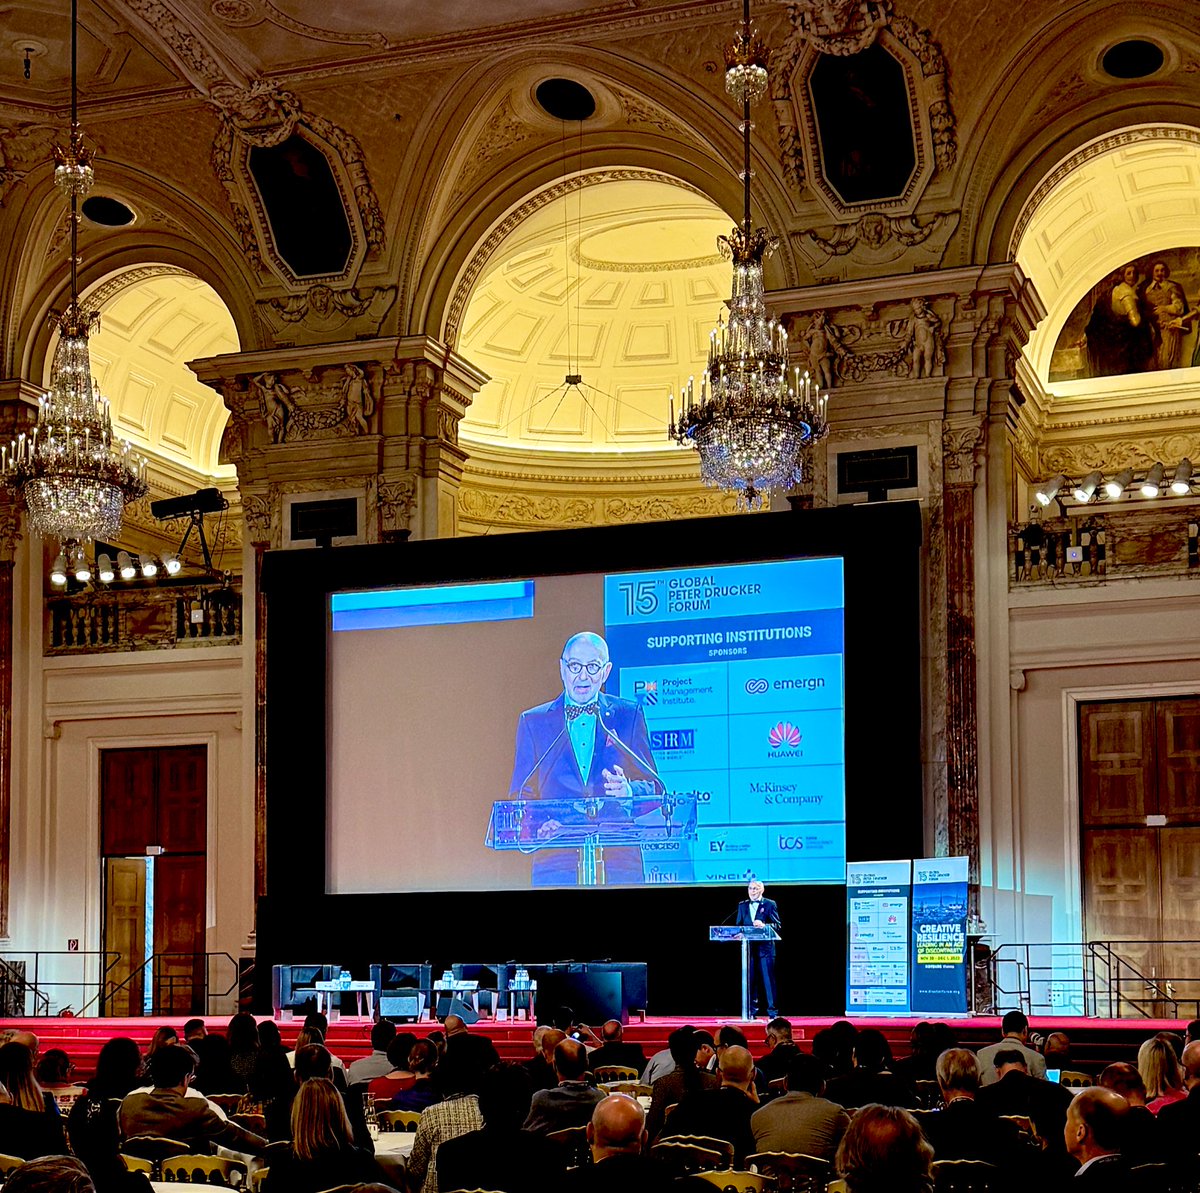 Excited for 2 days @GDruckerForum in Vienna and it’s an honor to chair a panel on Engaging Hearts and Minds in a Change Journey. Thank you @rstraub46 for the invitation. #DruckerForum